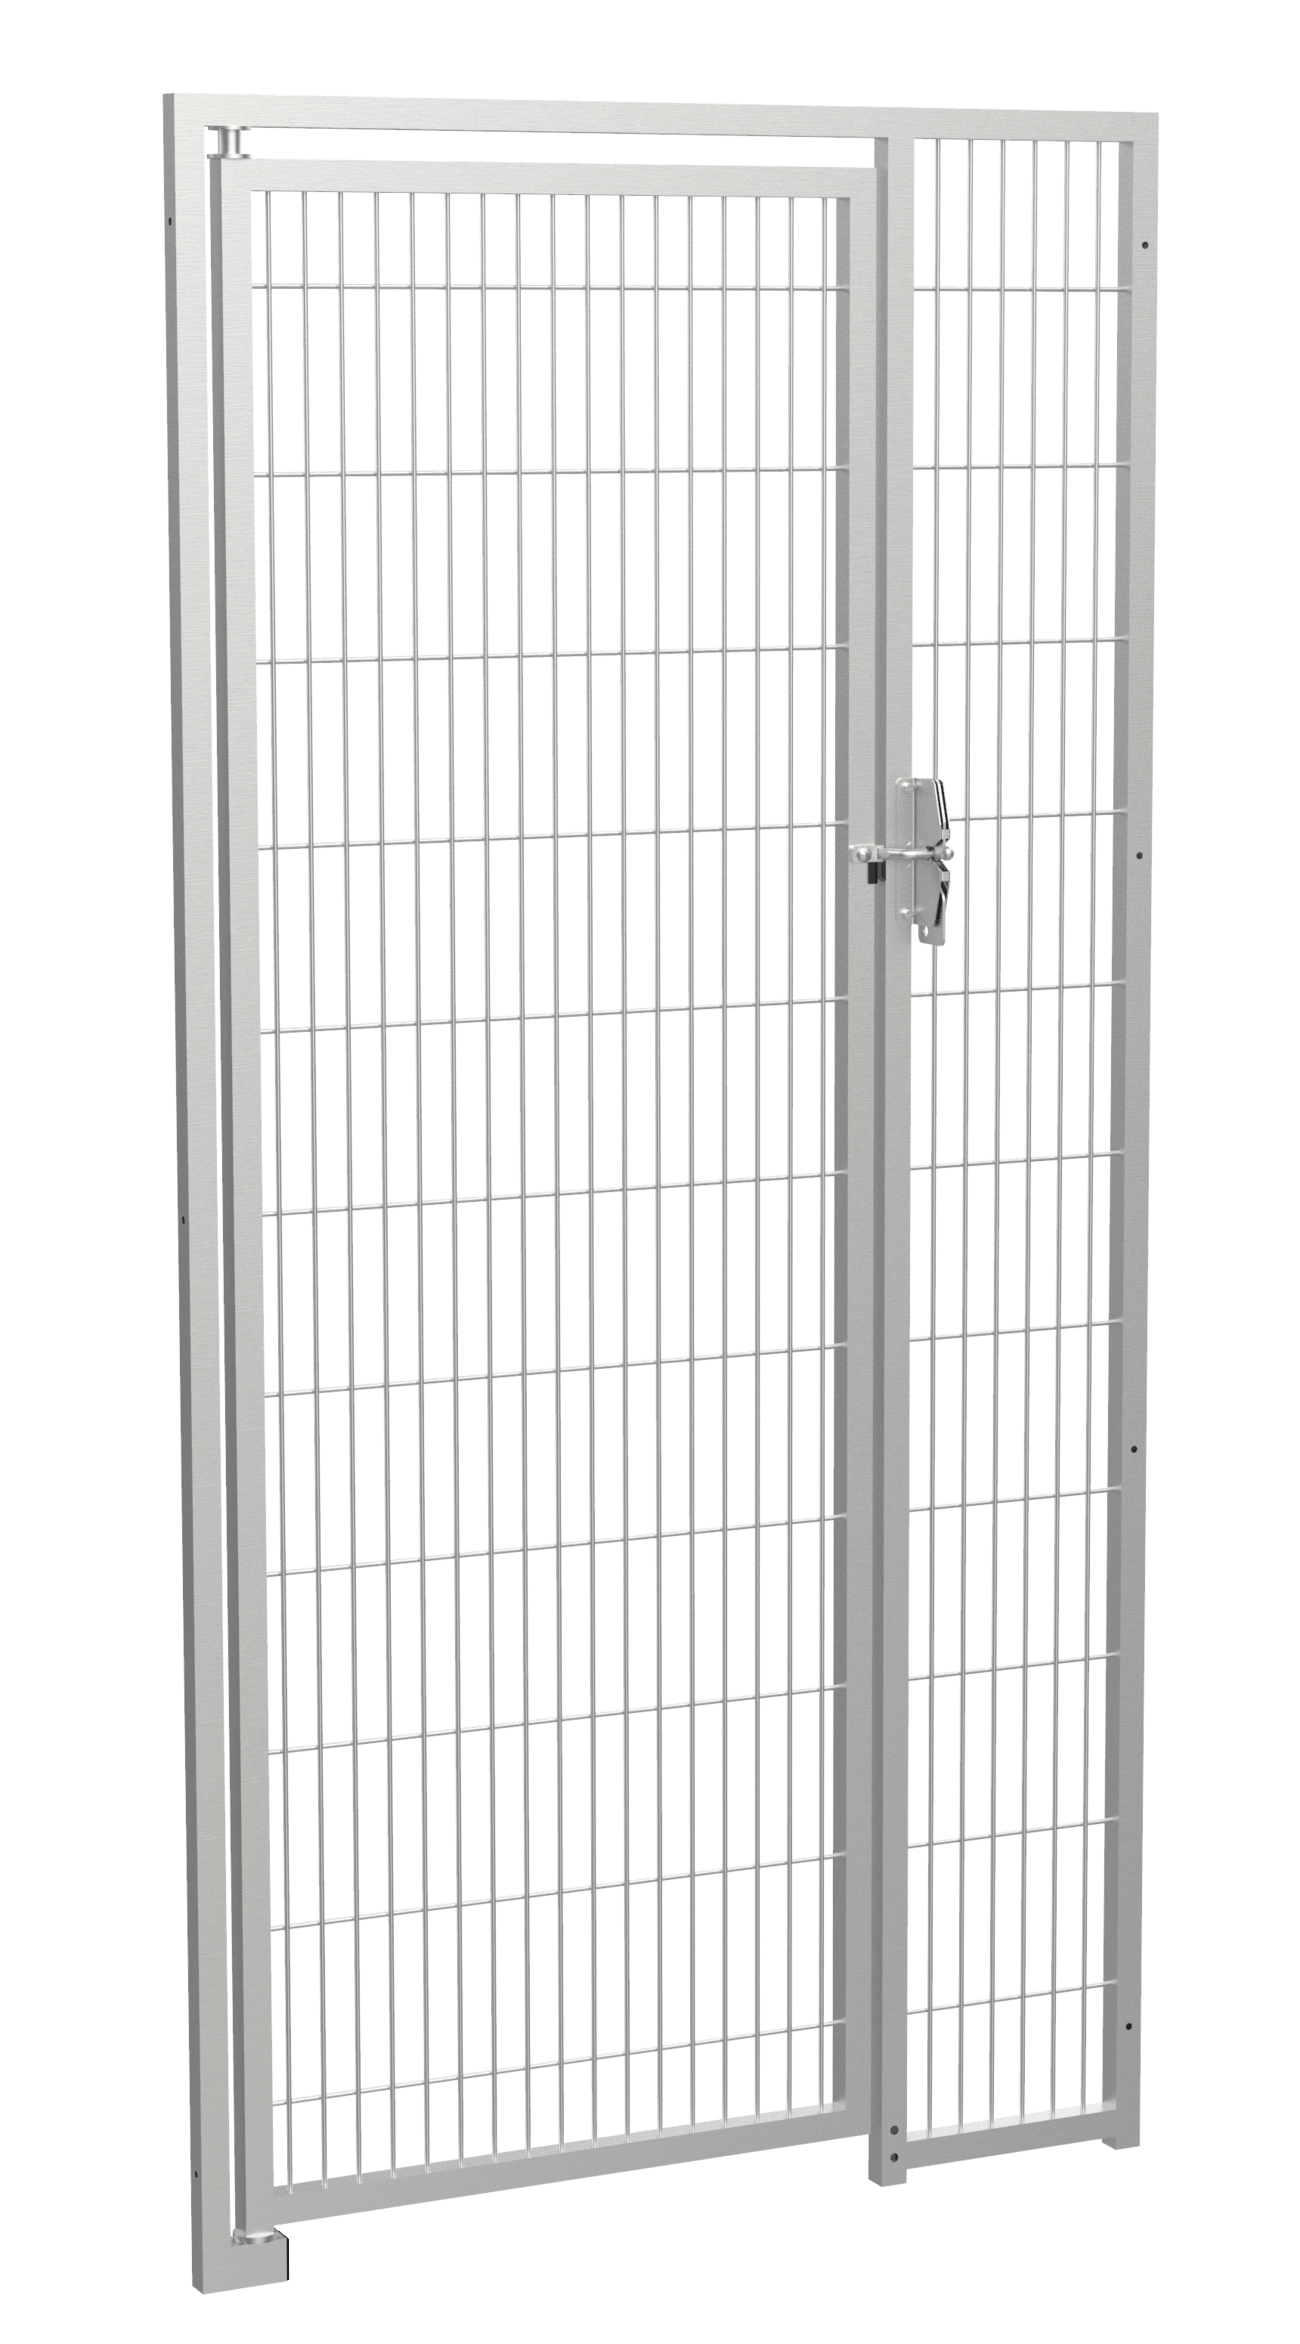 Stainless Steel Gate without Bottom Bar